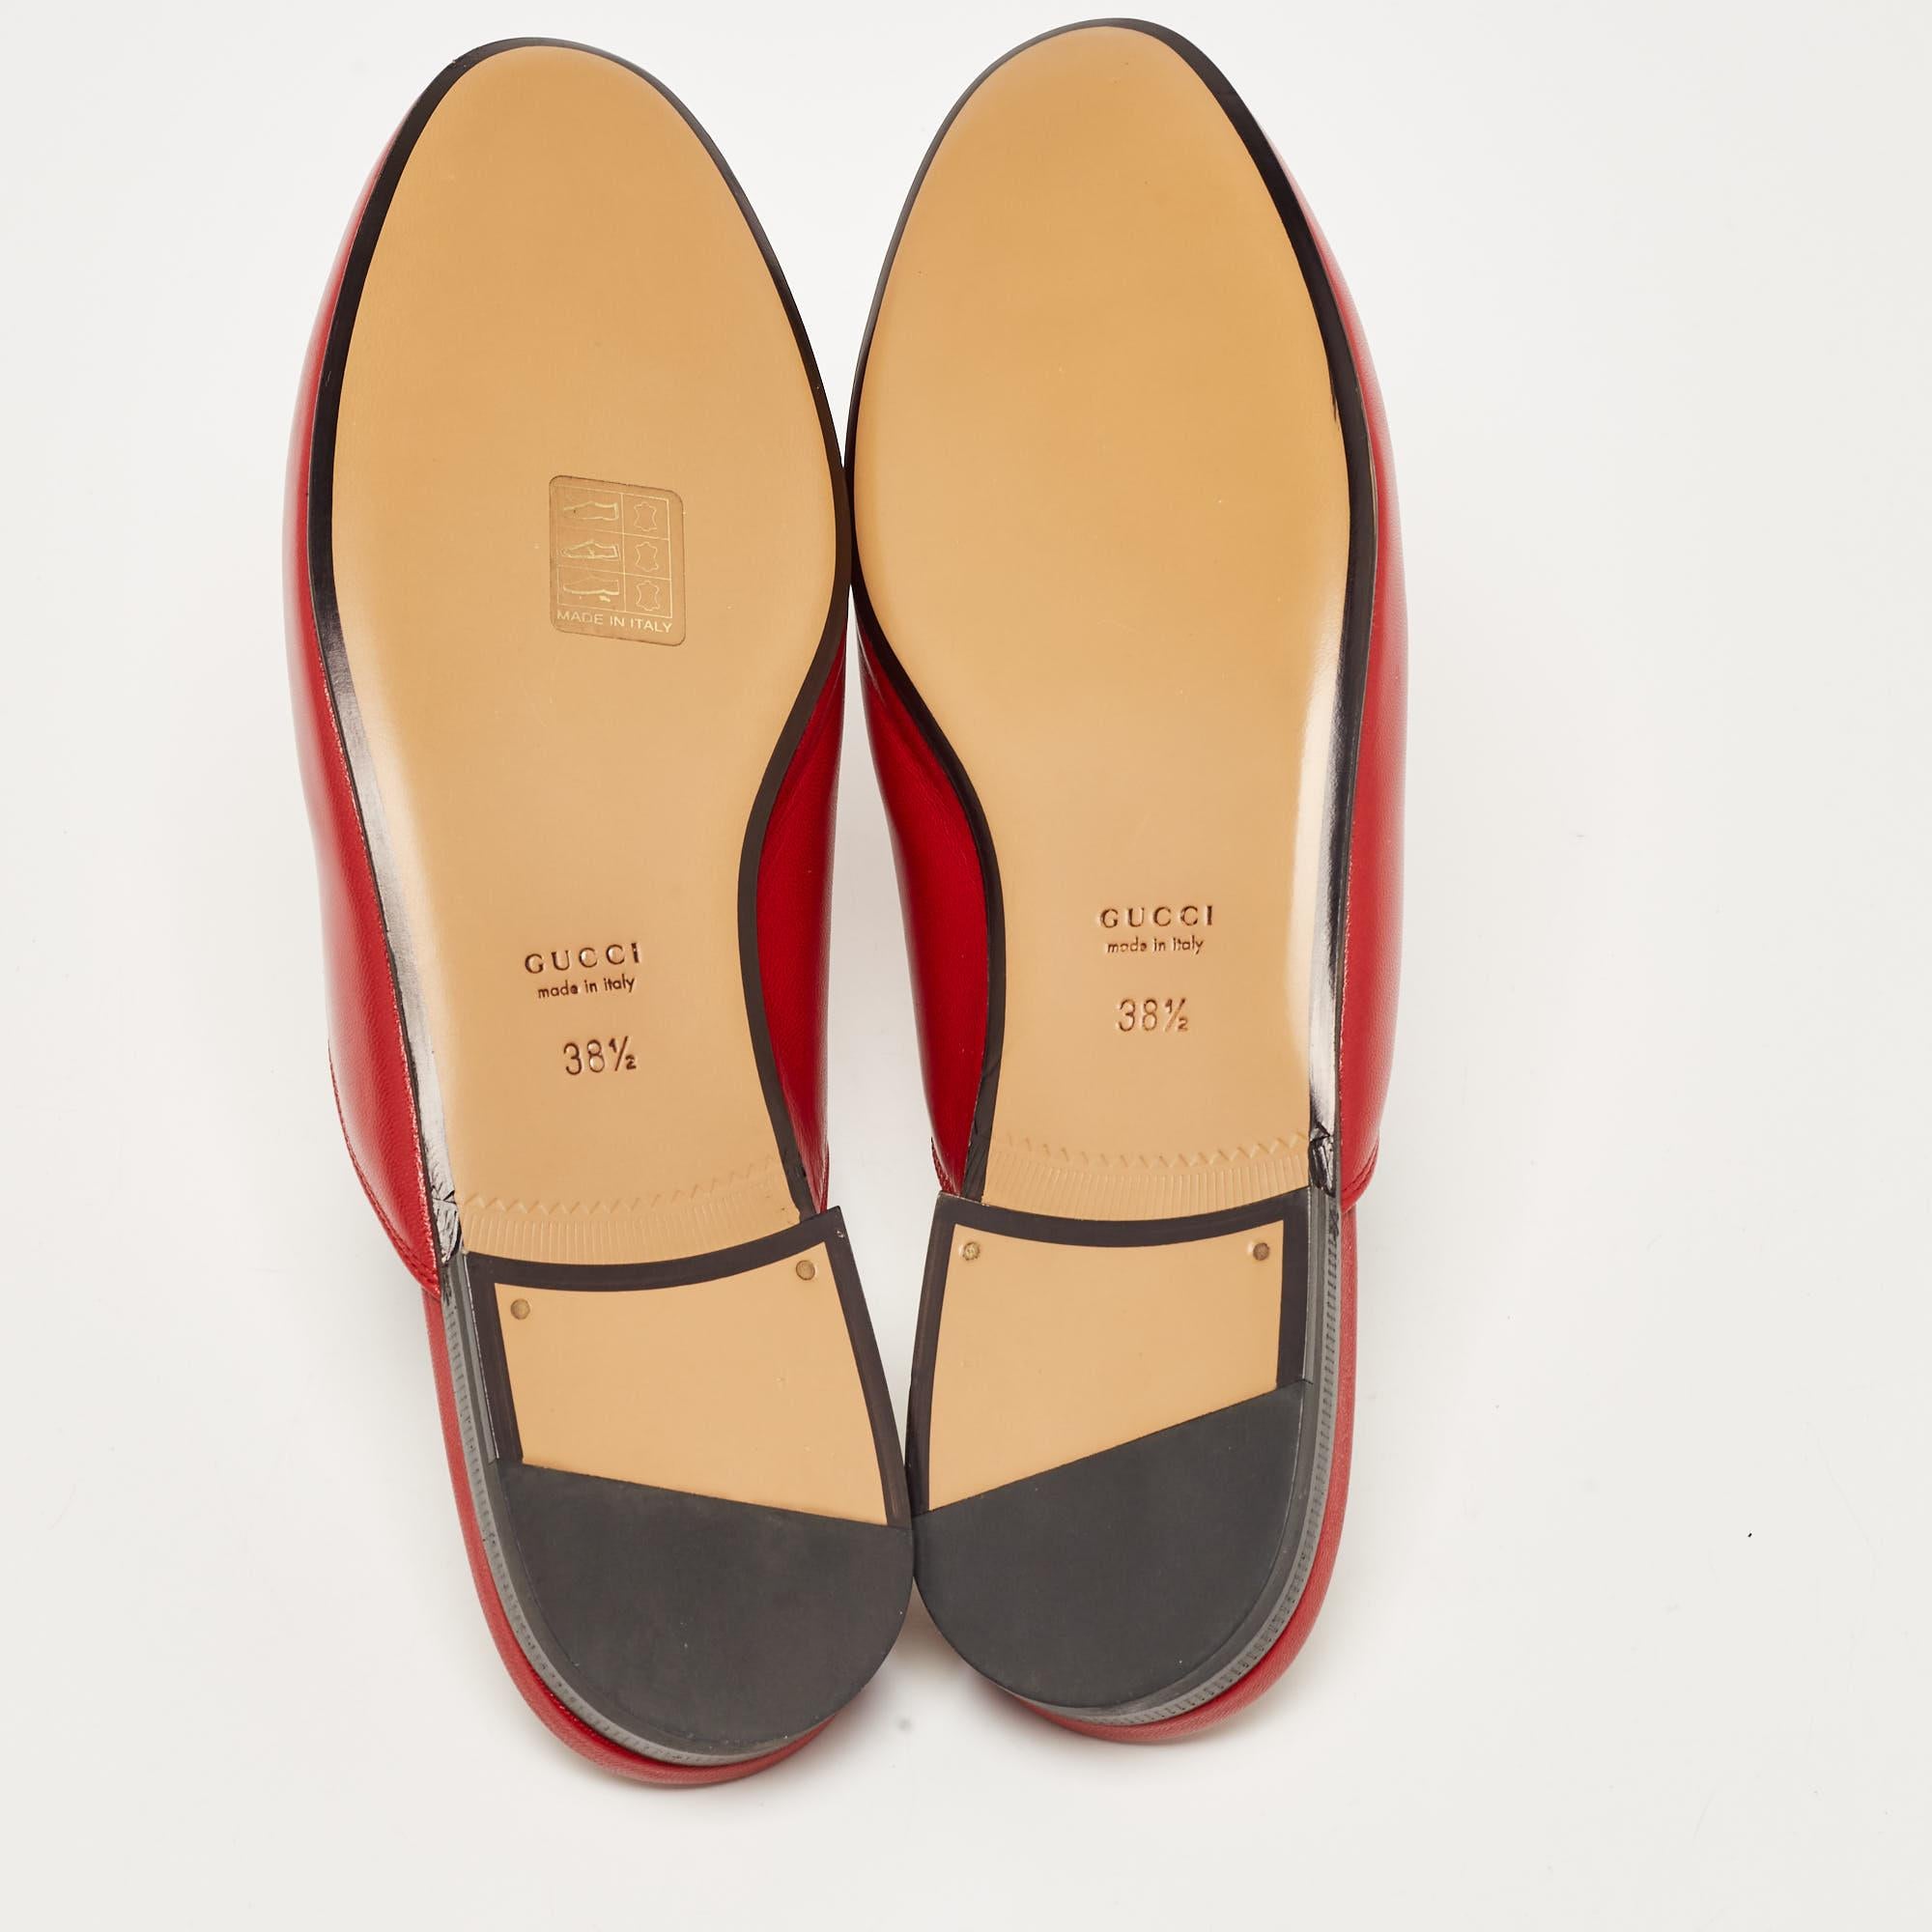 Gucci Red Leather Princetown Flat Mules Size 38.5 5